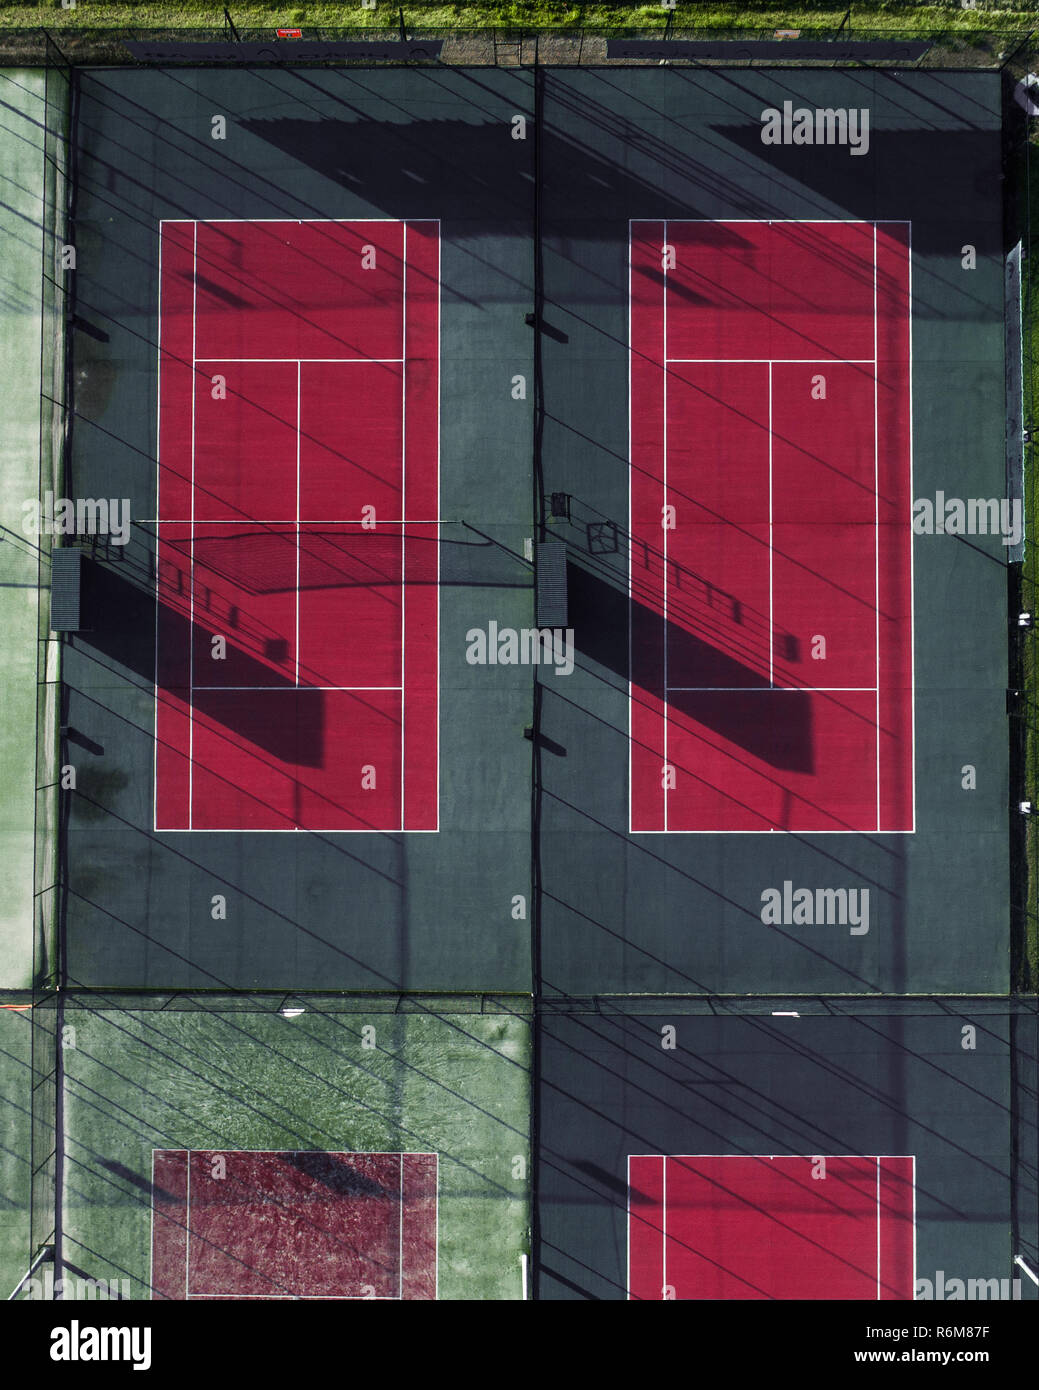 Tennis court from above Stock Photo